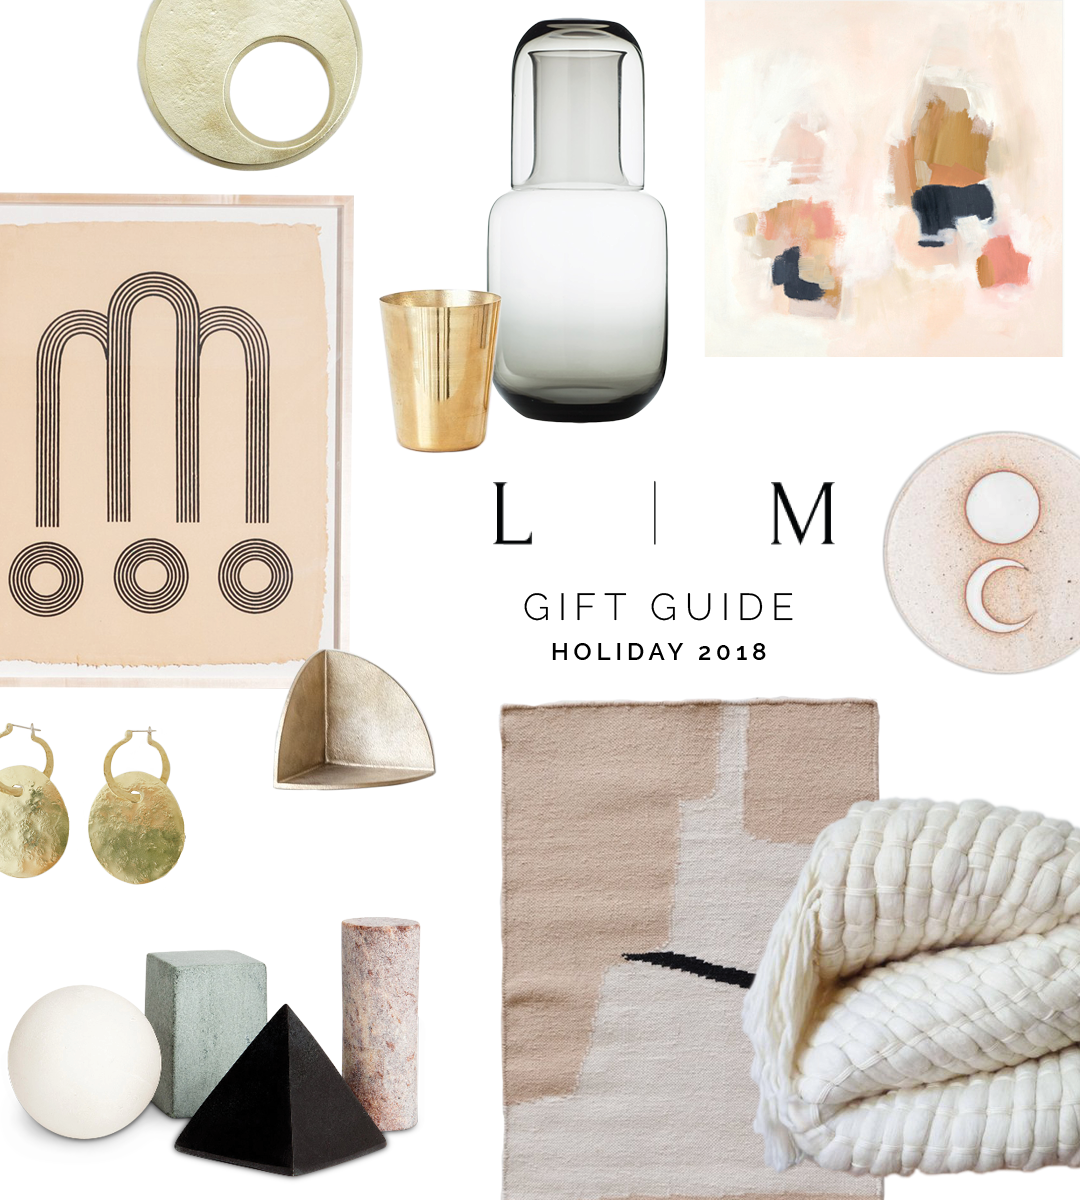 The Ultimate Wellness Gift Guide - The Sister Project Blog